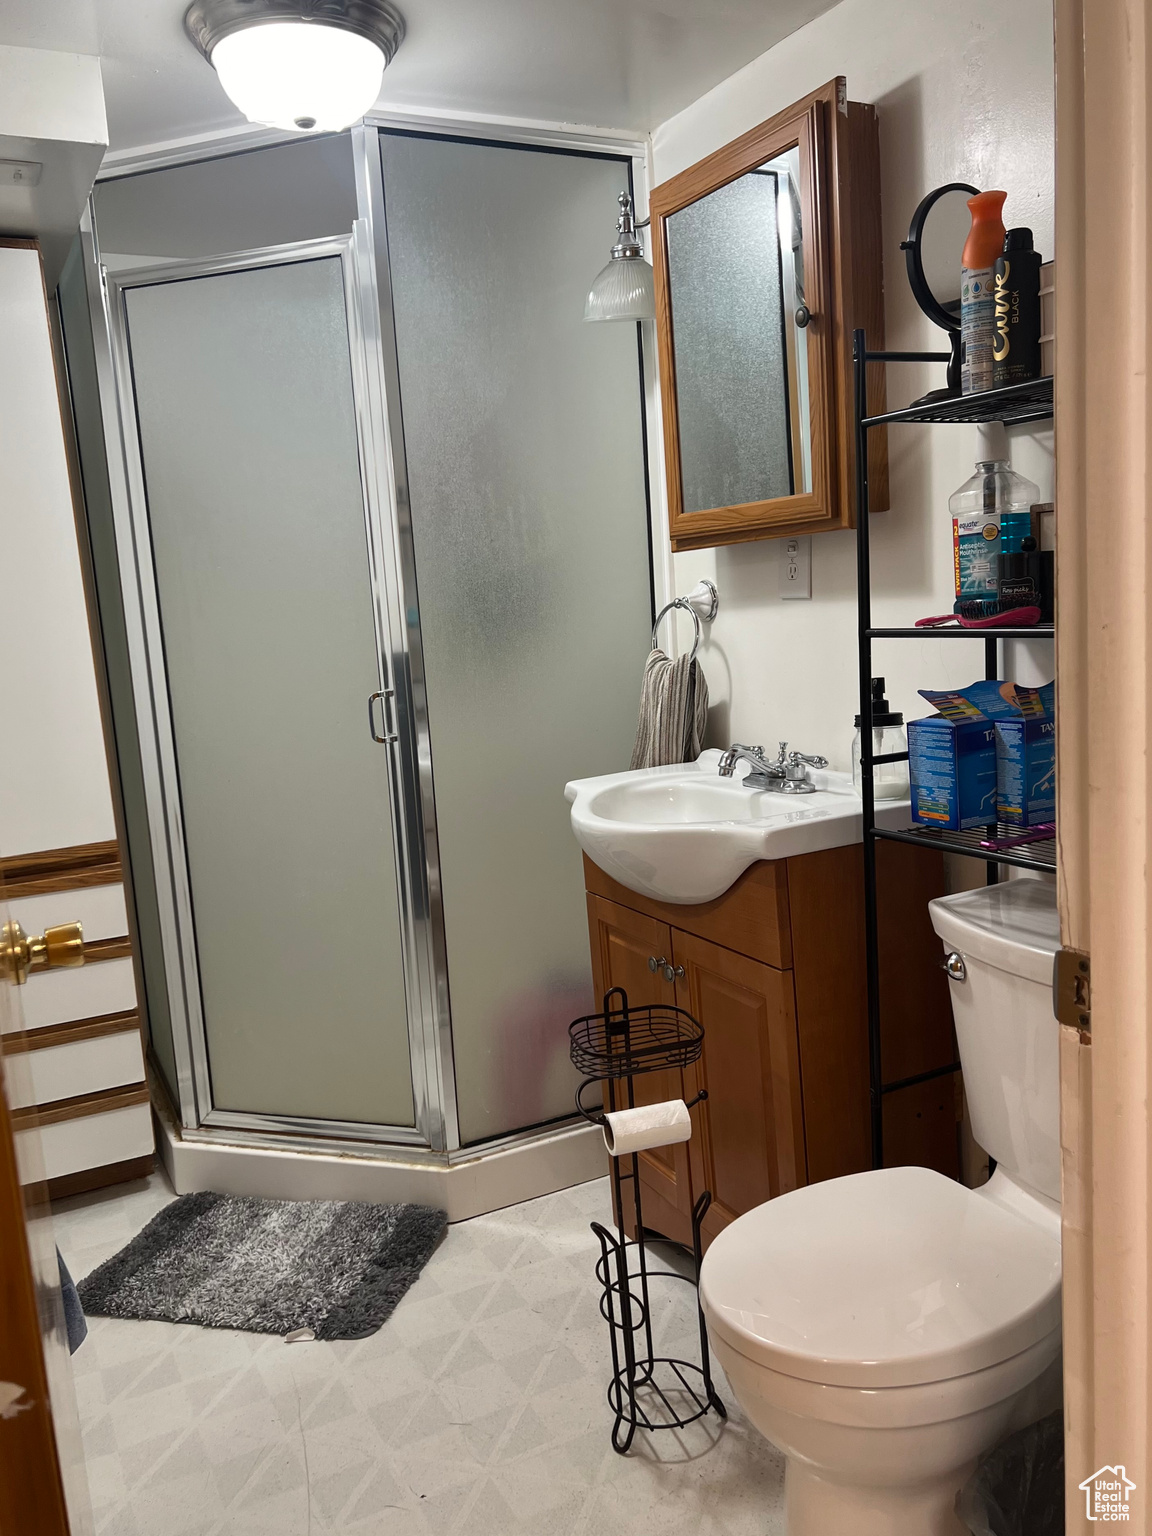 Bathroom featuring tile flooring, an enclosed shower, toilet, and vanity